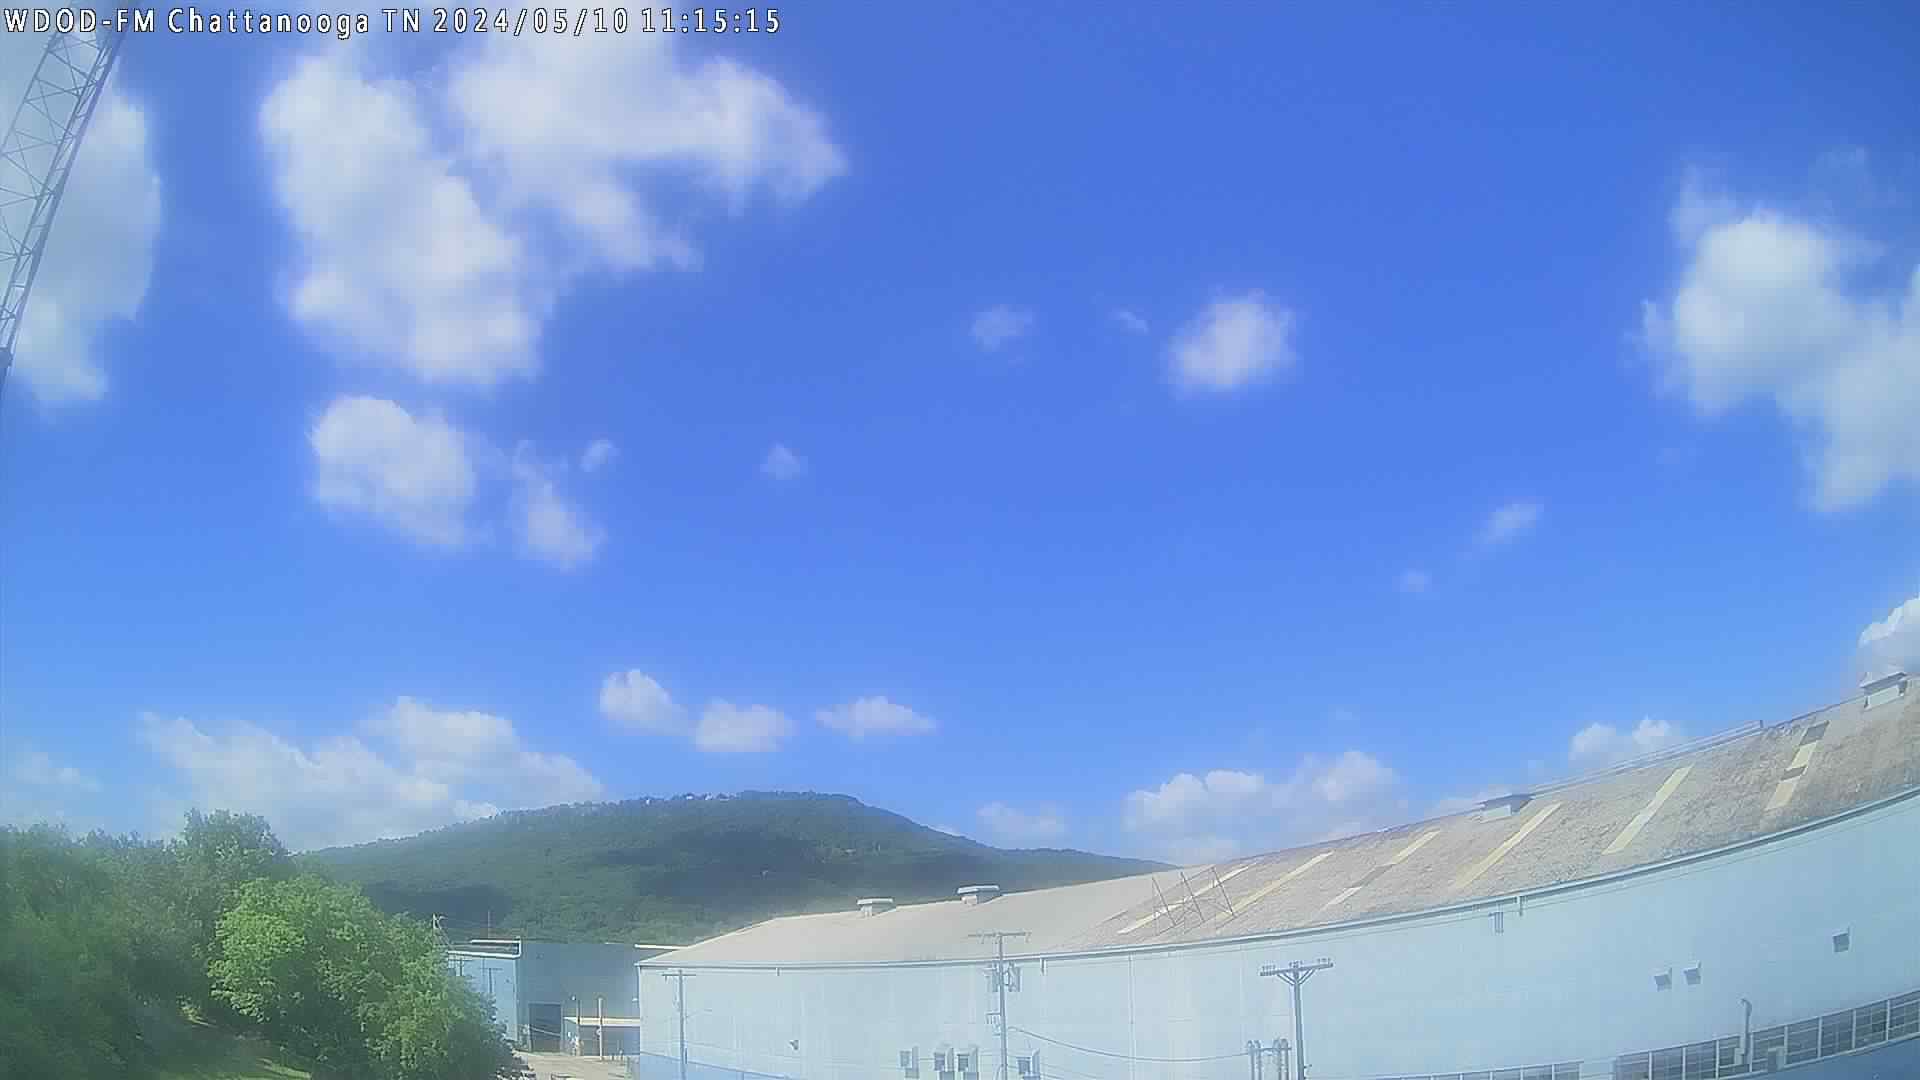  WeatherSTEM Cloud Camera Sunny92_3WxSTEM in Hamilton County, Tennessee TN at Sunny 92.3 Chattanooga